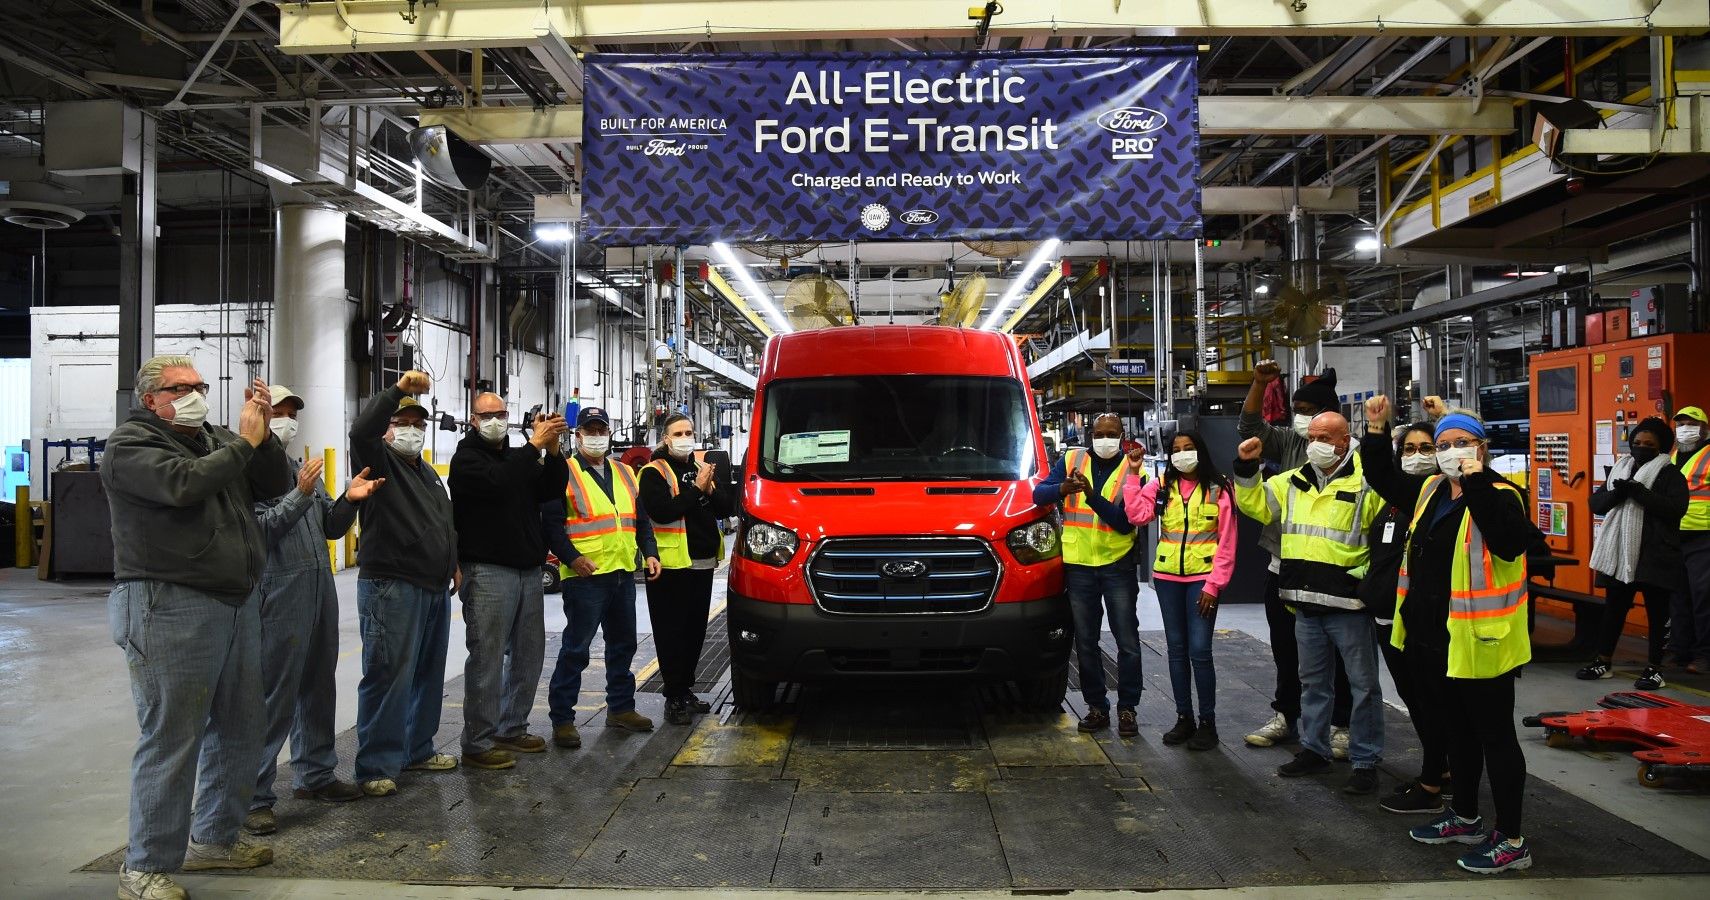 The first Ford E-Transit rolling of the production line